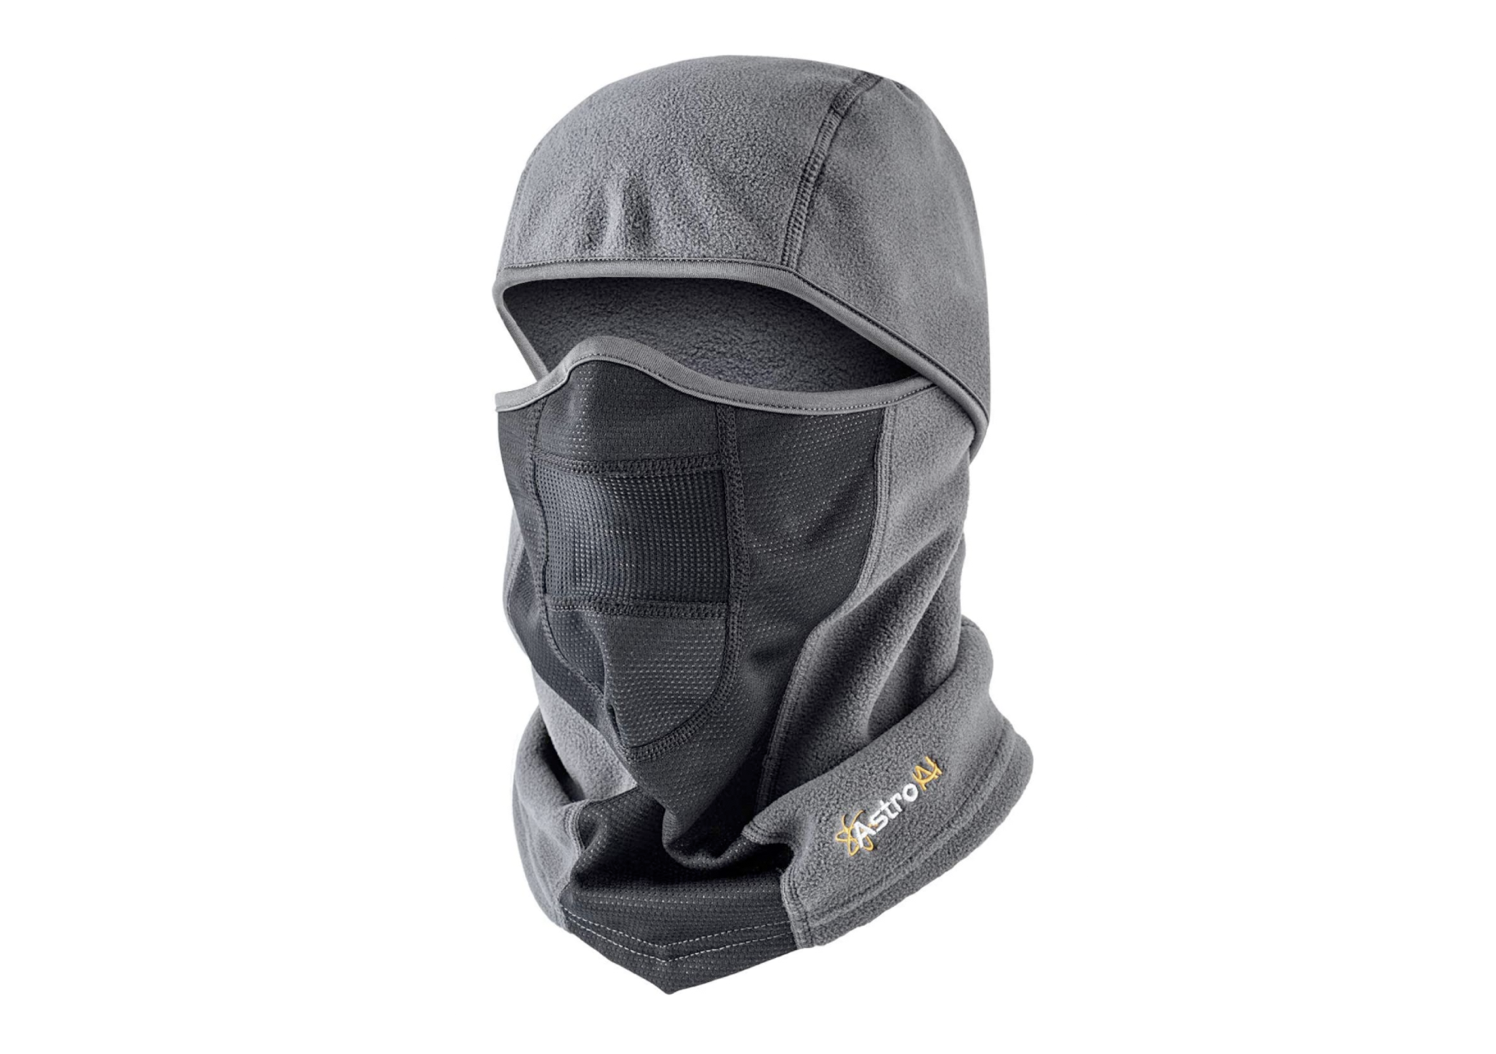 Tactical Camouflage Balaclava Face Mask Winter Fleece Thermal Ski Mask for Men